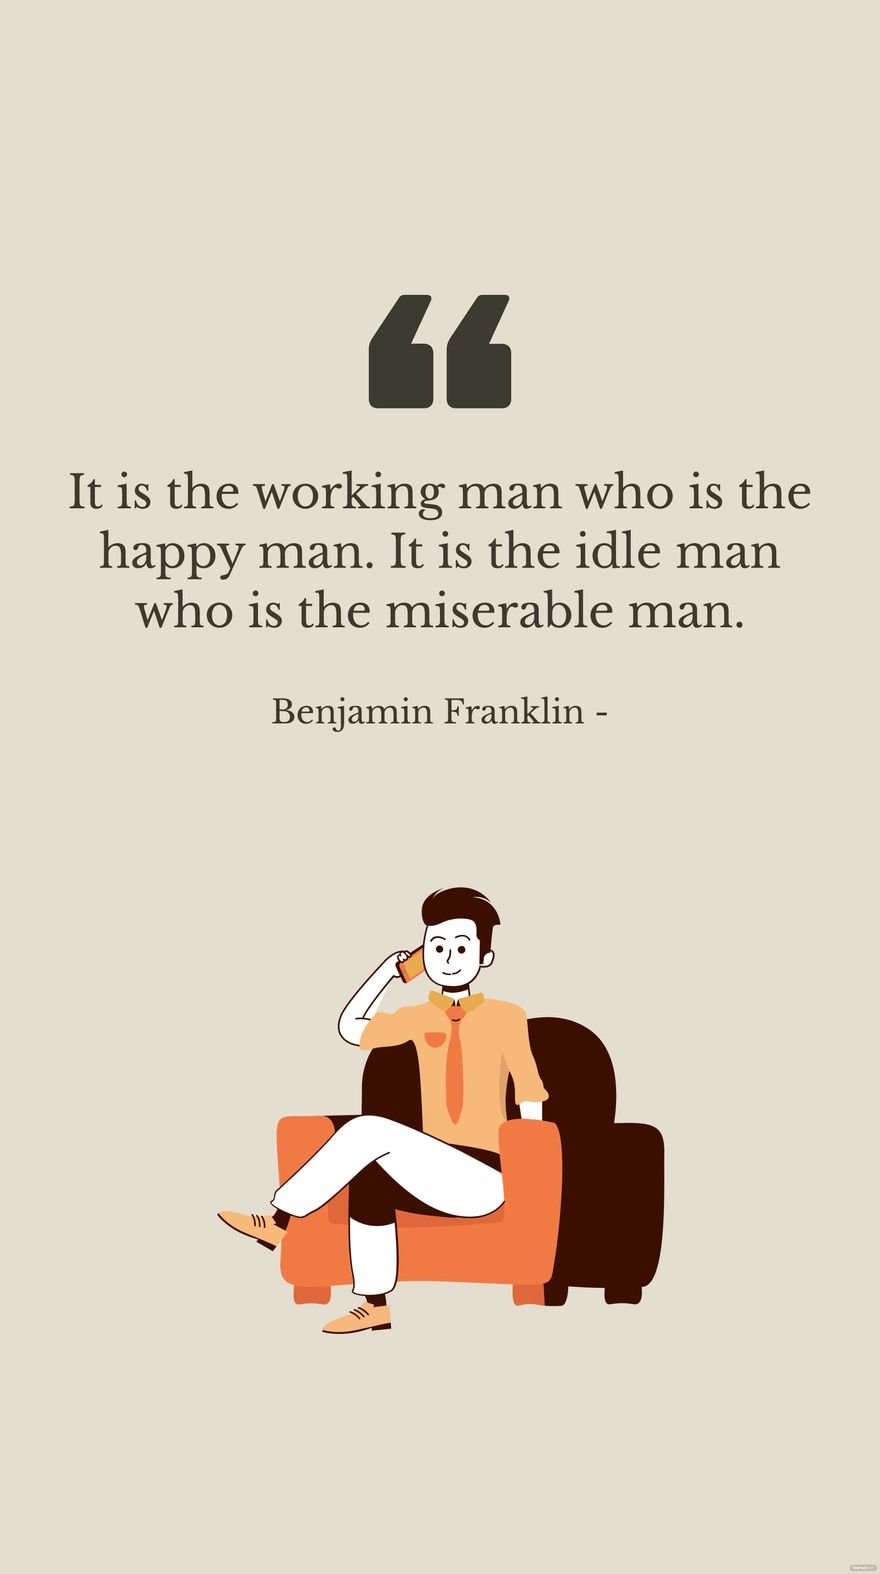 Benjamin Franklin - It is the working man who is the happy man. It is the idle man who is the miserable man.